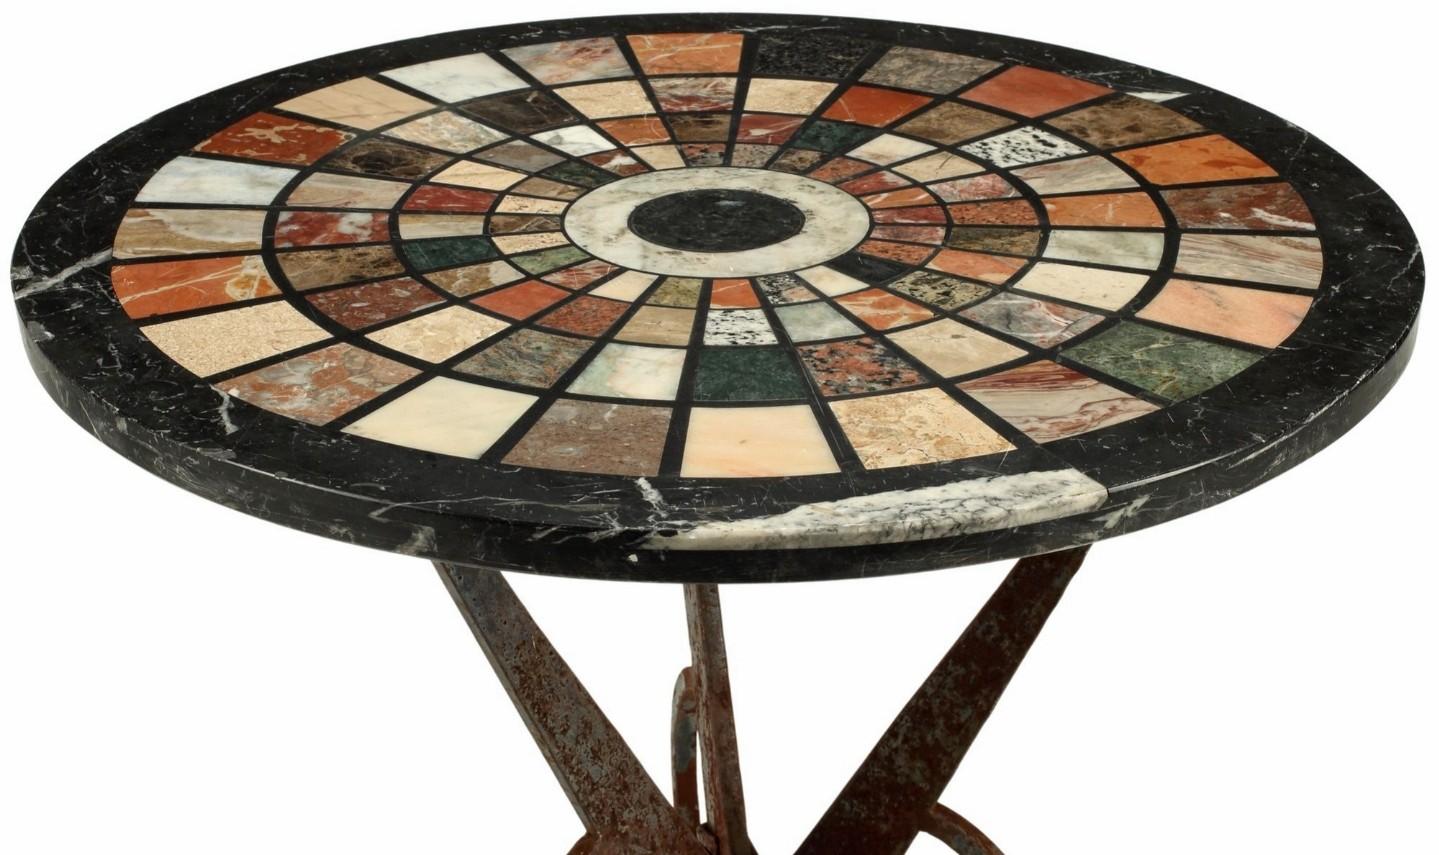 A visually striking wrought iron table topped with a magnificent 19th century Italian Grand Tour pietra dura style circular specimen top. Inlaid with 99 rare and exotic highly polished marble and precious hardstone samples arranged in a symmetrical